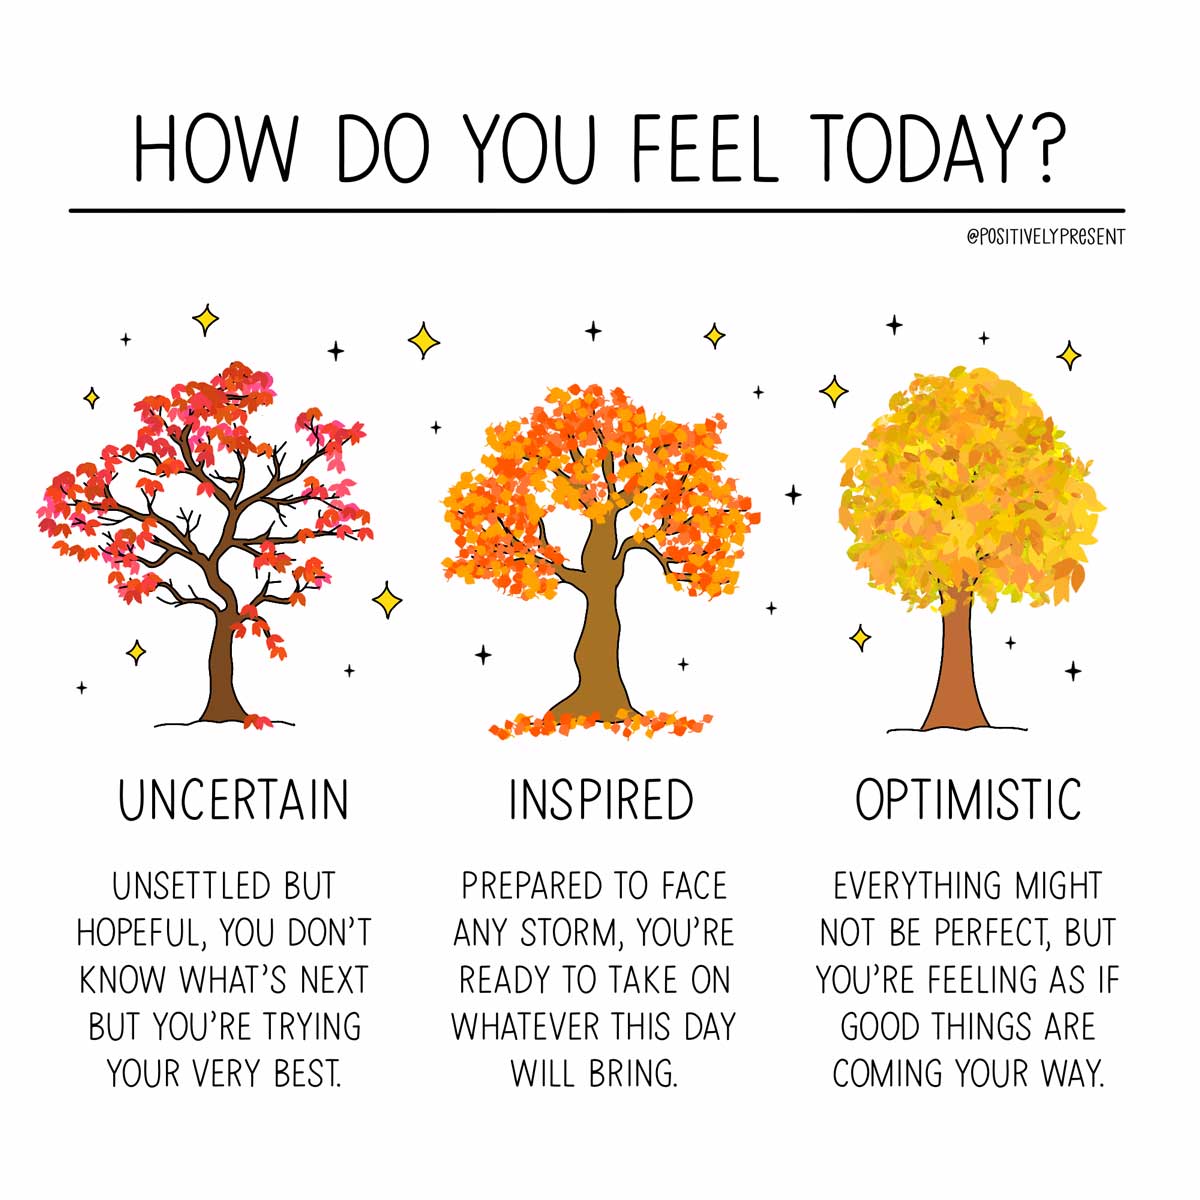 illustration of 3 trees with 3 different feelings says how do you feel today.